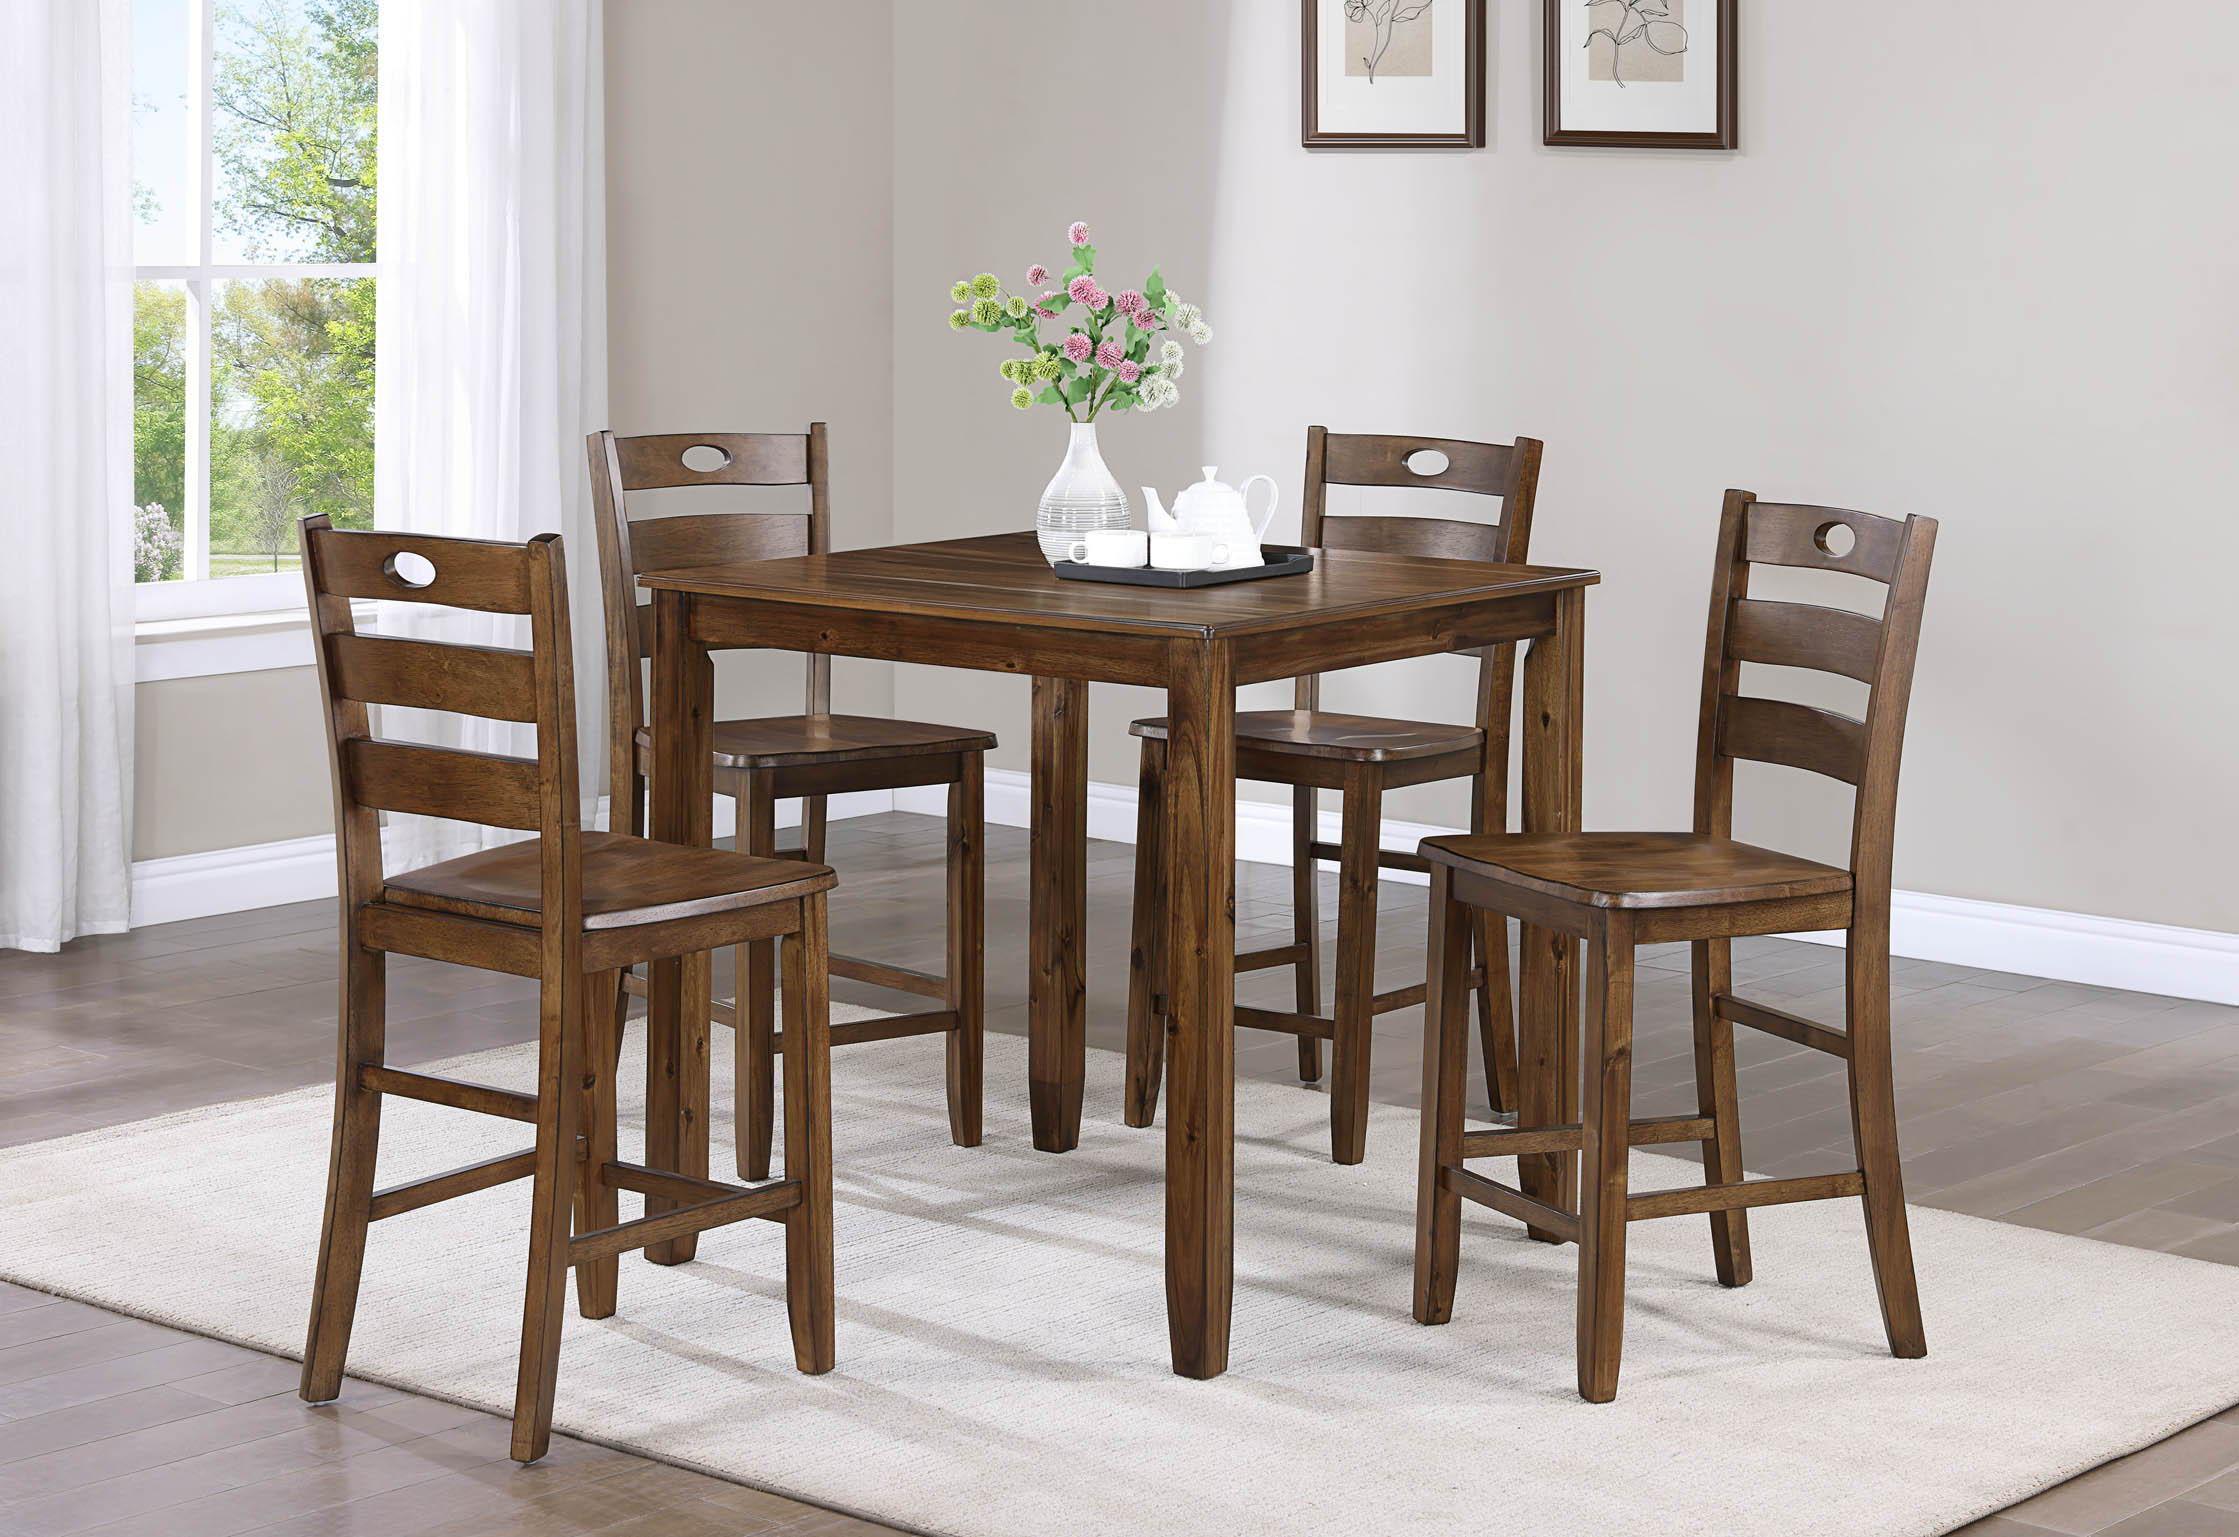 Crown Mark - Ashborn - 5 Piece Counter Height Table Set - Brown - 5th Avenue Furniture